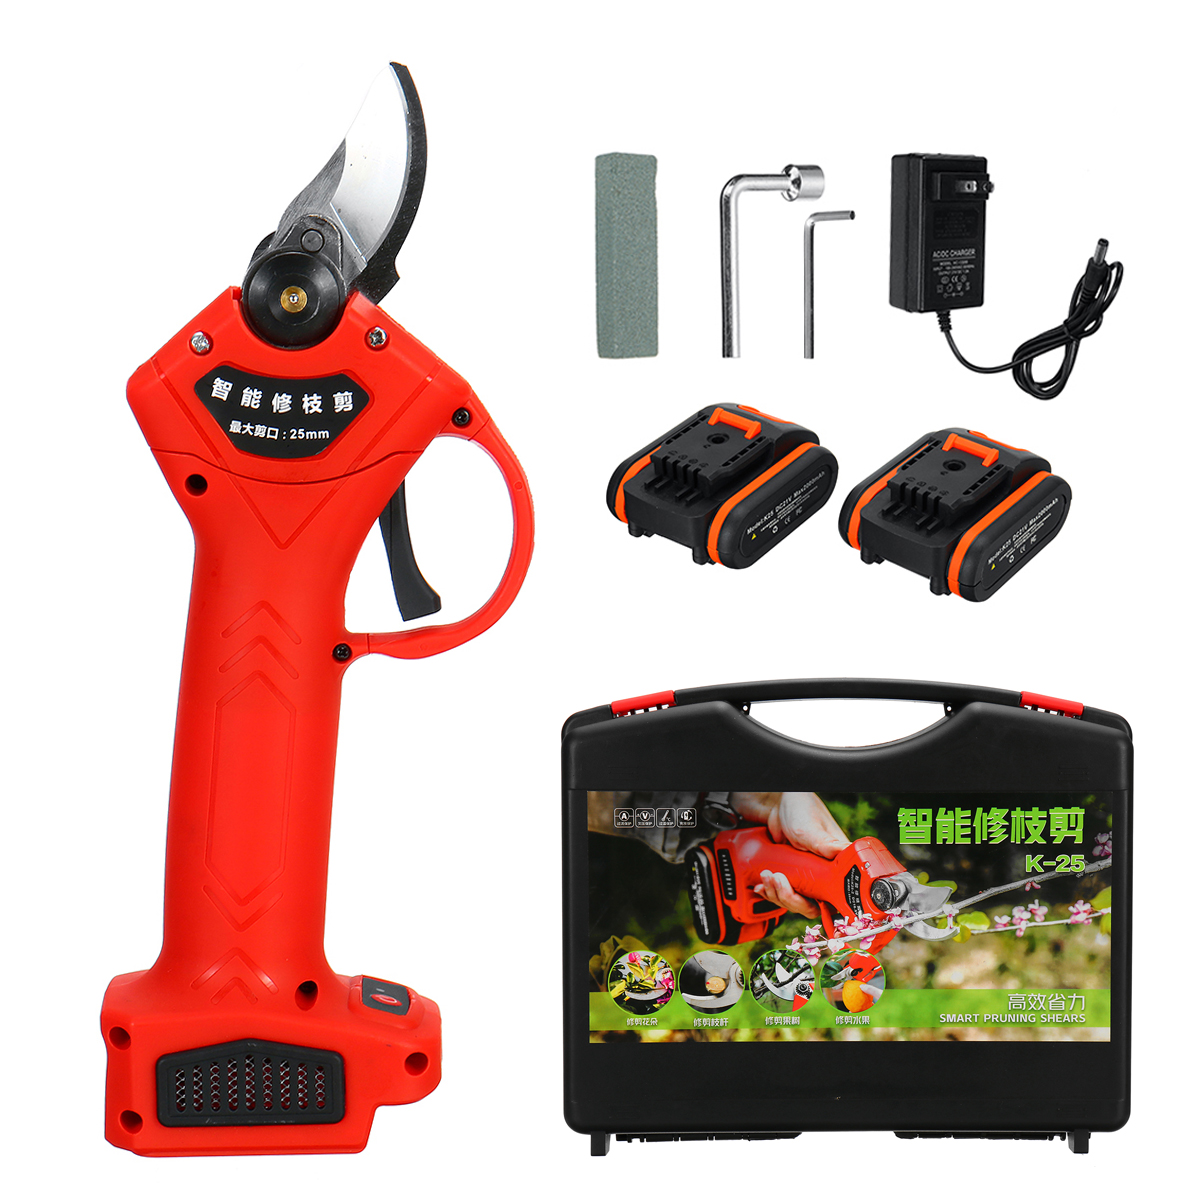 21V-Cordless-Electric-Pruning-Shears-Garden-Pruner-Branch-Cutting-Tool-With-12-Battery-1776780-9